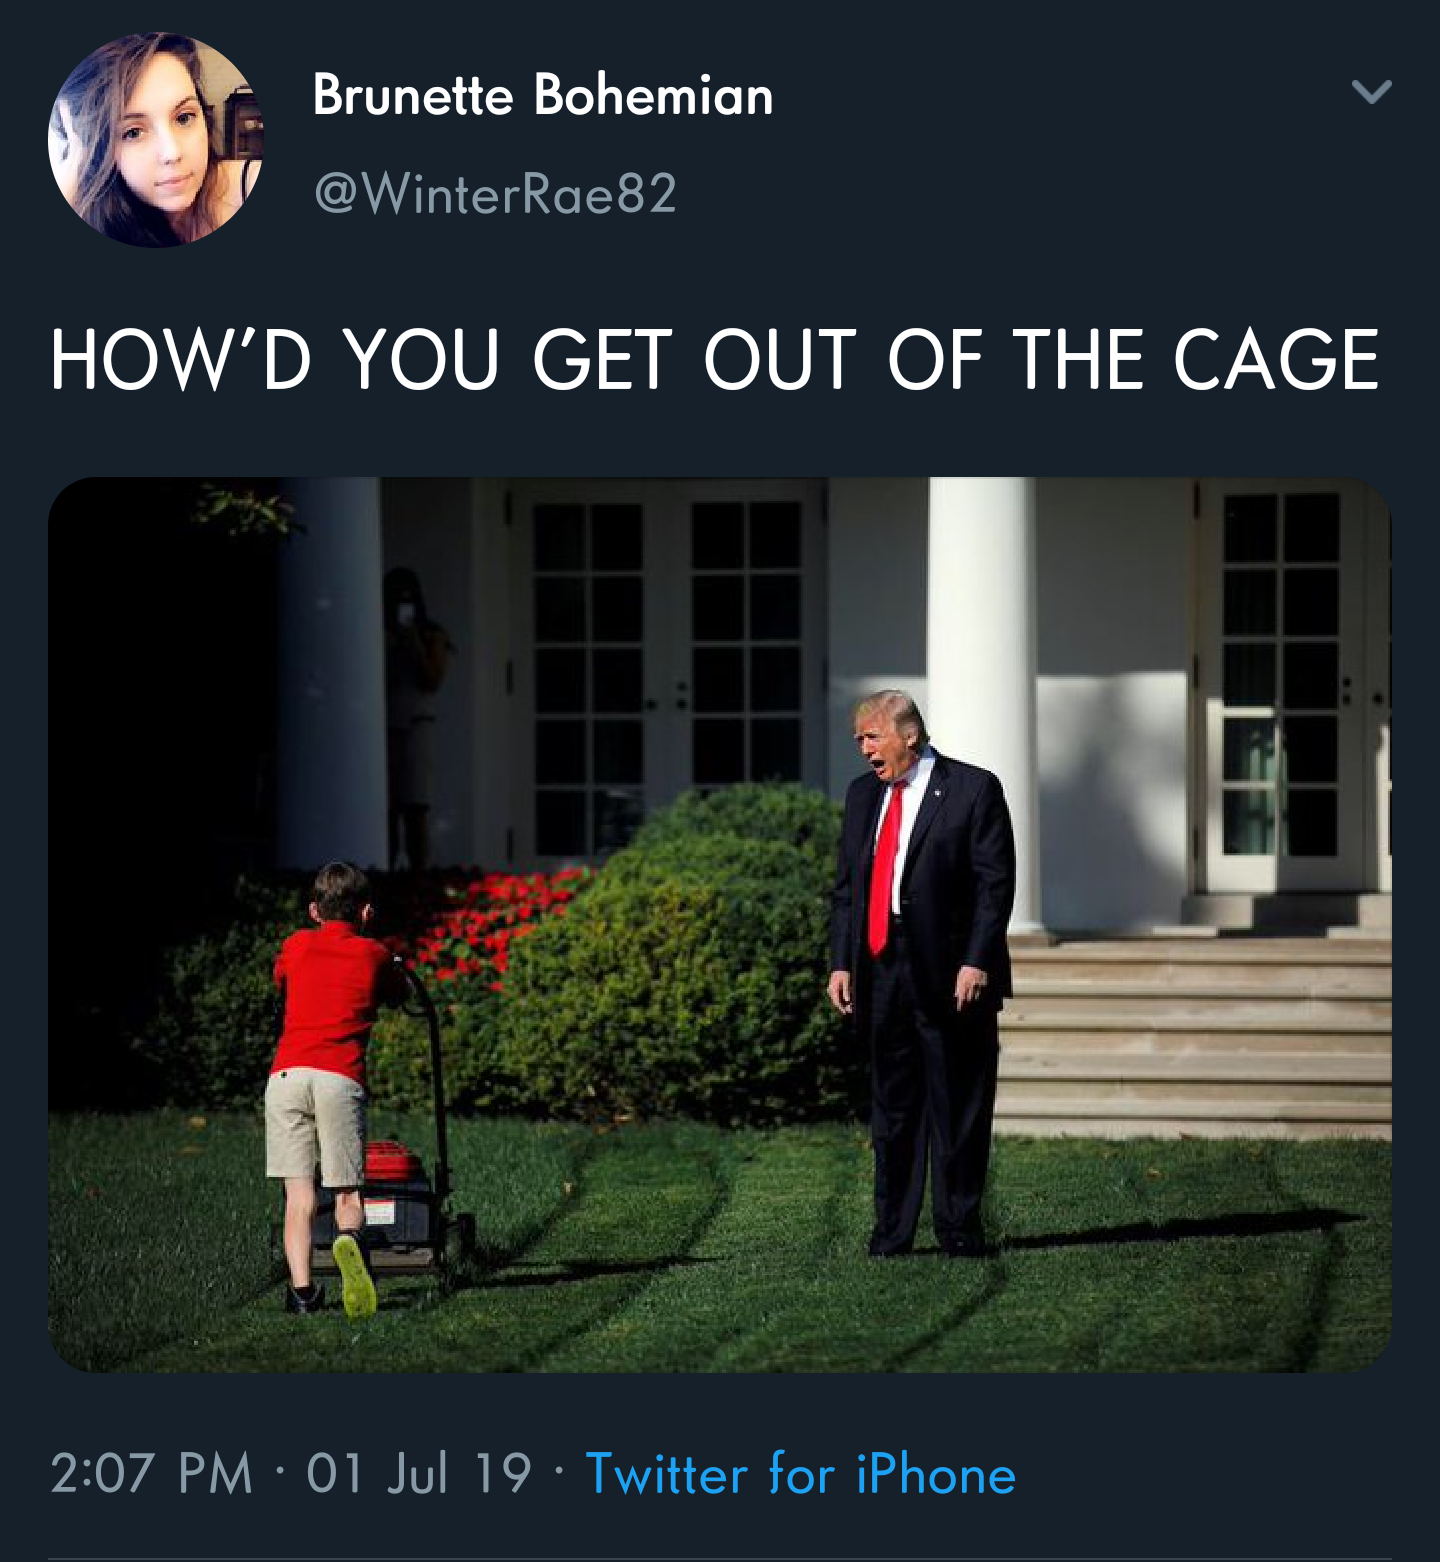 trump kid mowing lawn meme - Brunette Bohemian How'D You Get Out Of The Cage 01 Jul 19 Twitter for iPhone